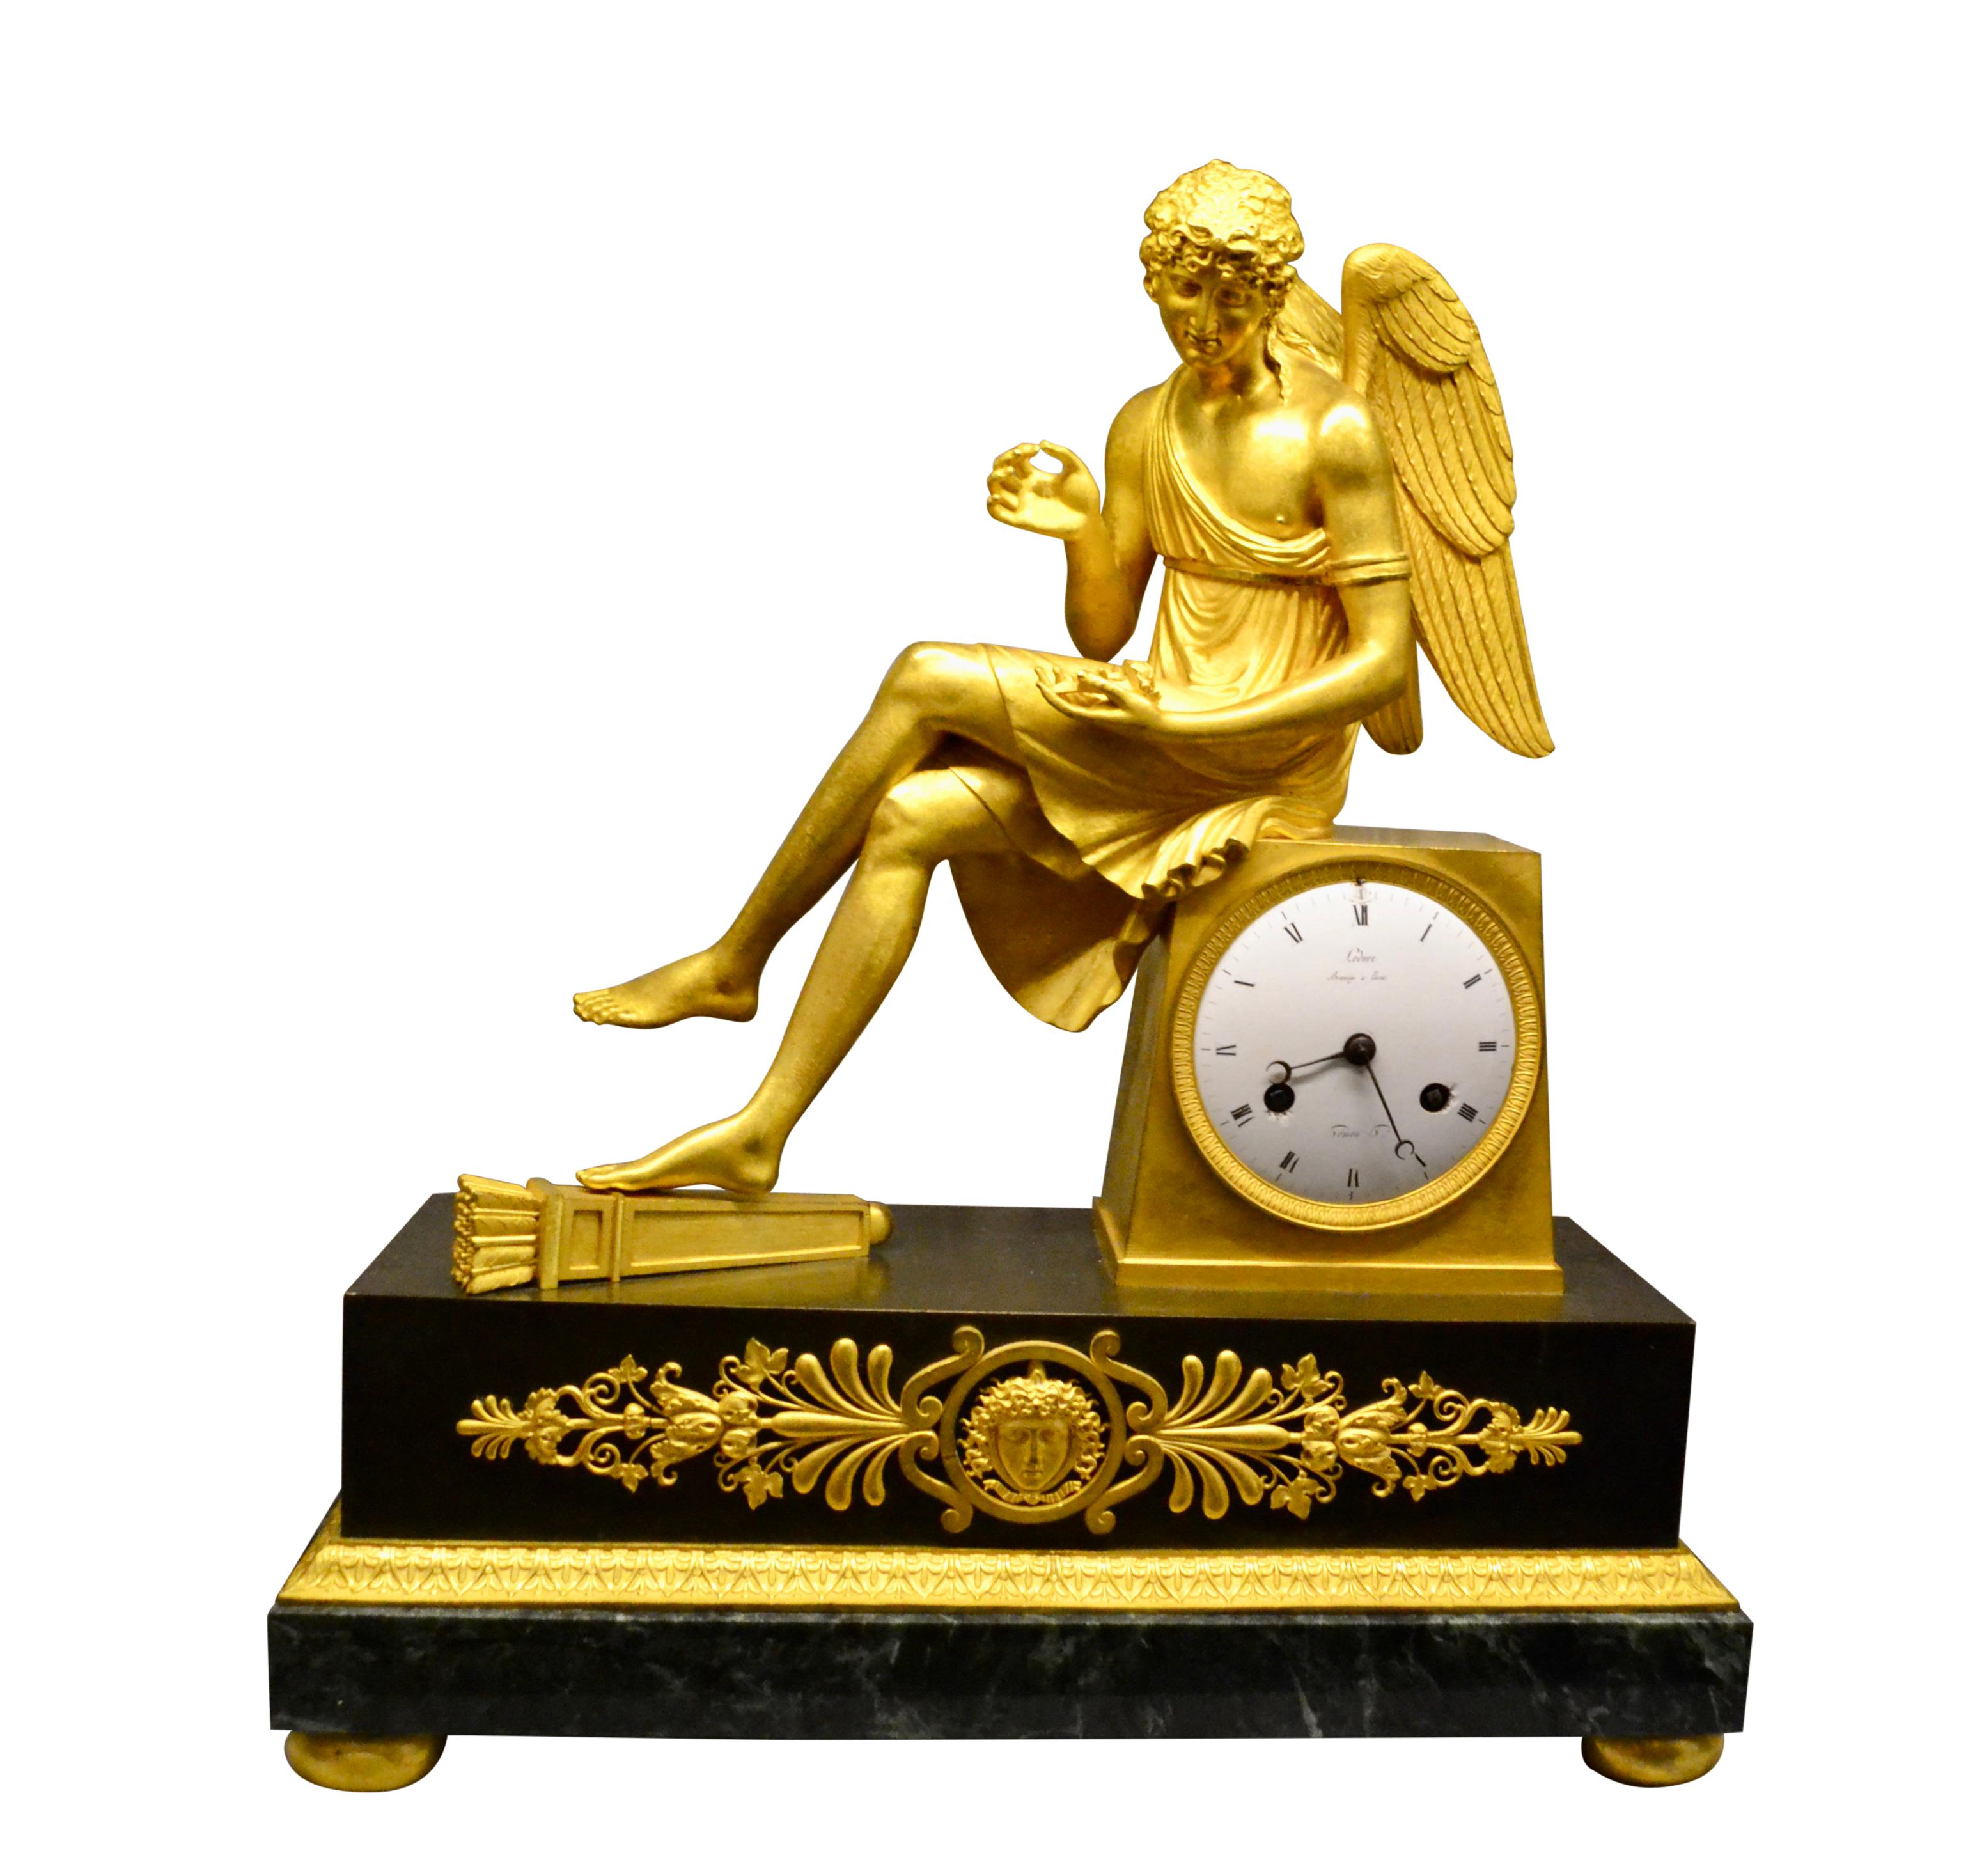 Finest quality period French Empire clock depicting a seated winged cupid holding a rose; the case in gilt and patinated bronze. The clock show a gilt cupid sitting cross legged on the clock plinth, with one foot resting on a quiver and his left